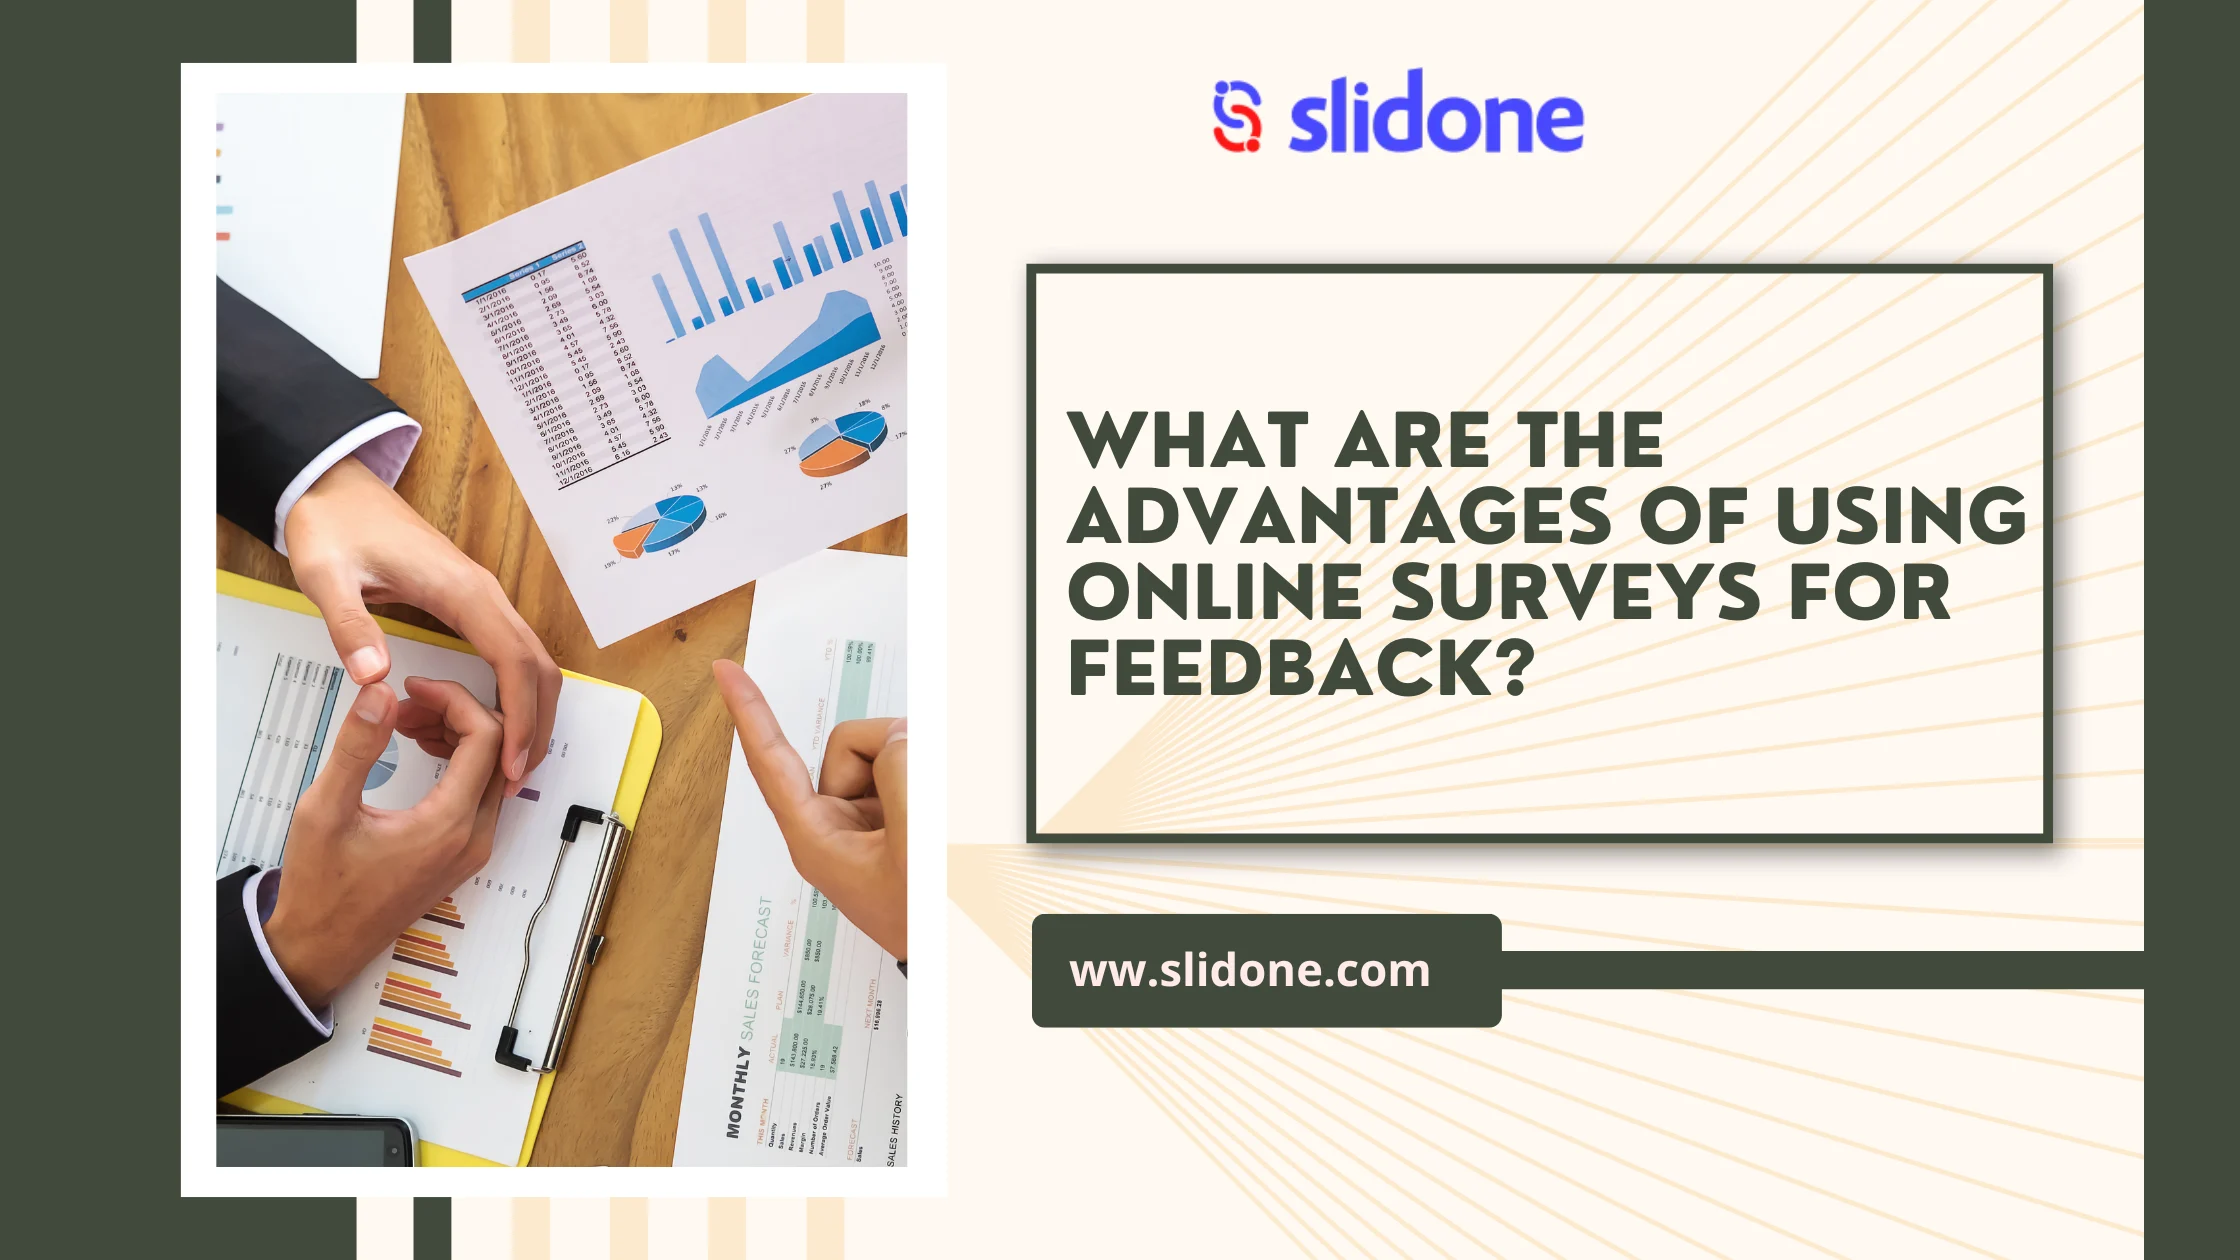 What Are the Advantages of Using Online Surveys for Feedback